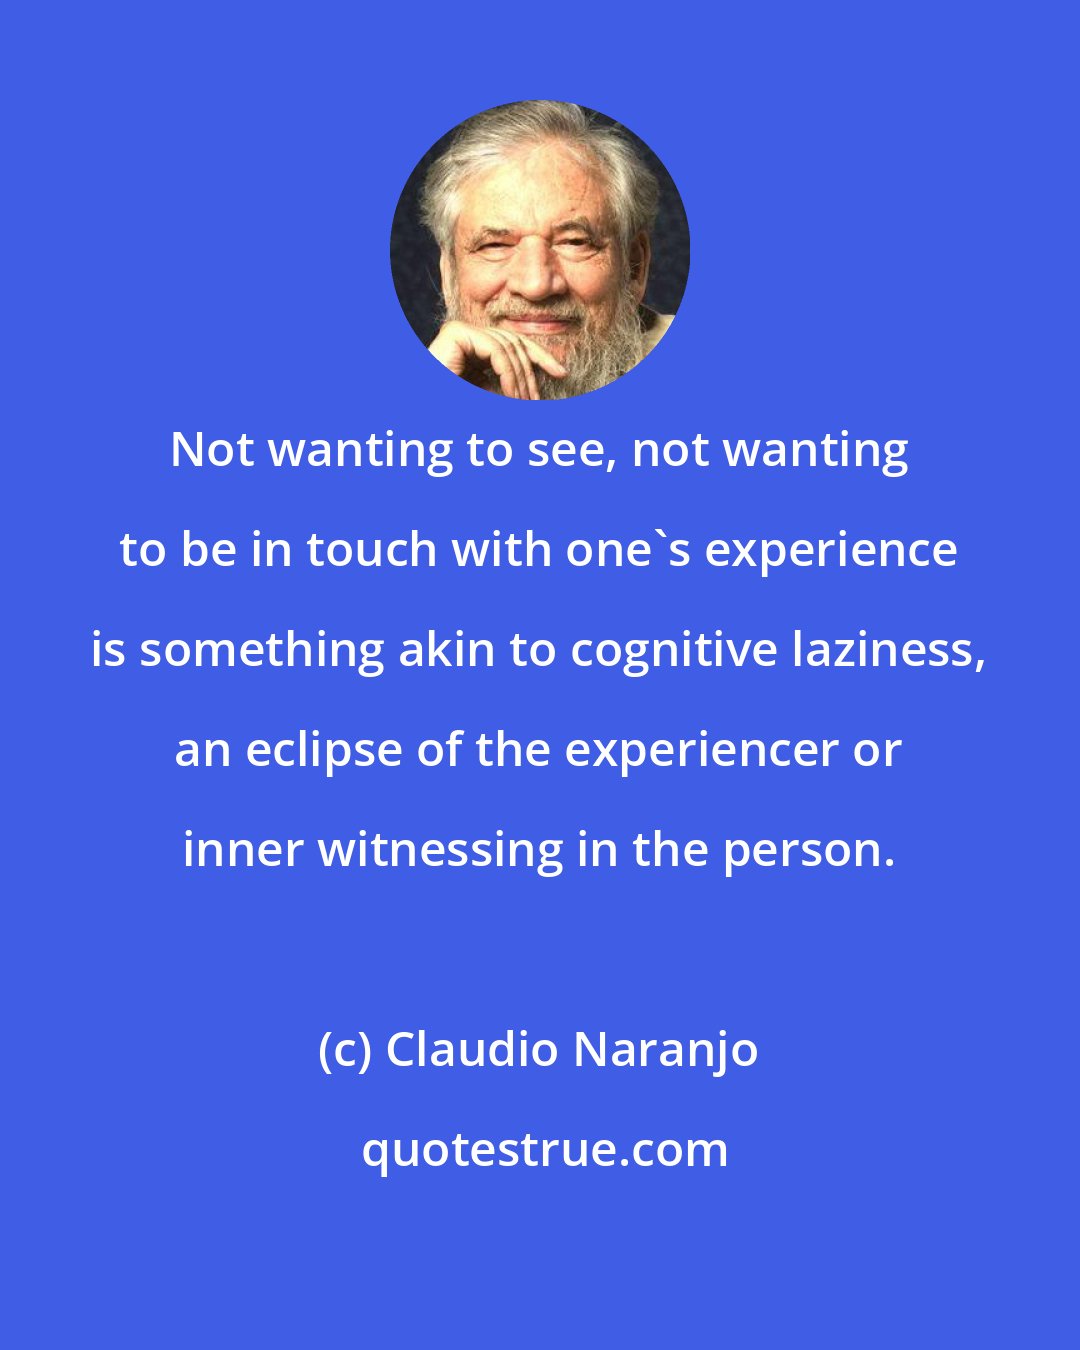 Claudio Naranjo: Not wanting to see, not wanting to be in touch with one's experience is something akin to cognitive laziness, an eclipse of the experiencer or inner witnessing in the person.